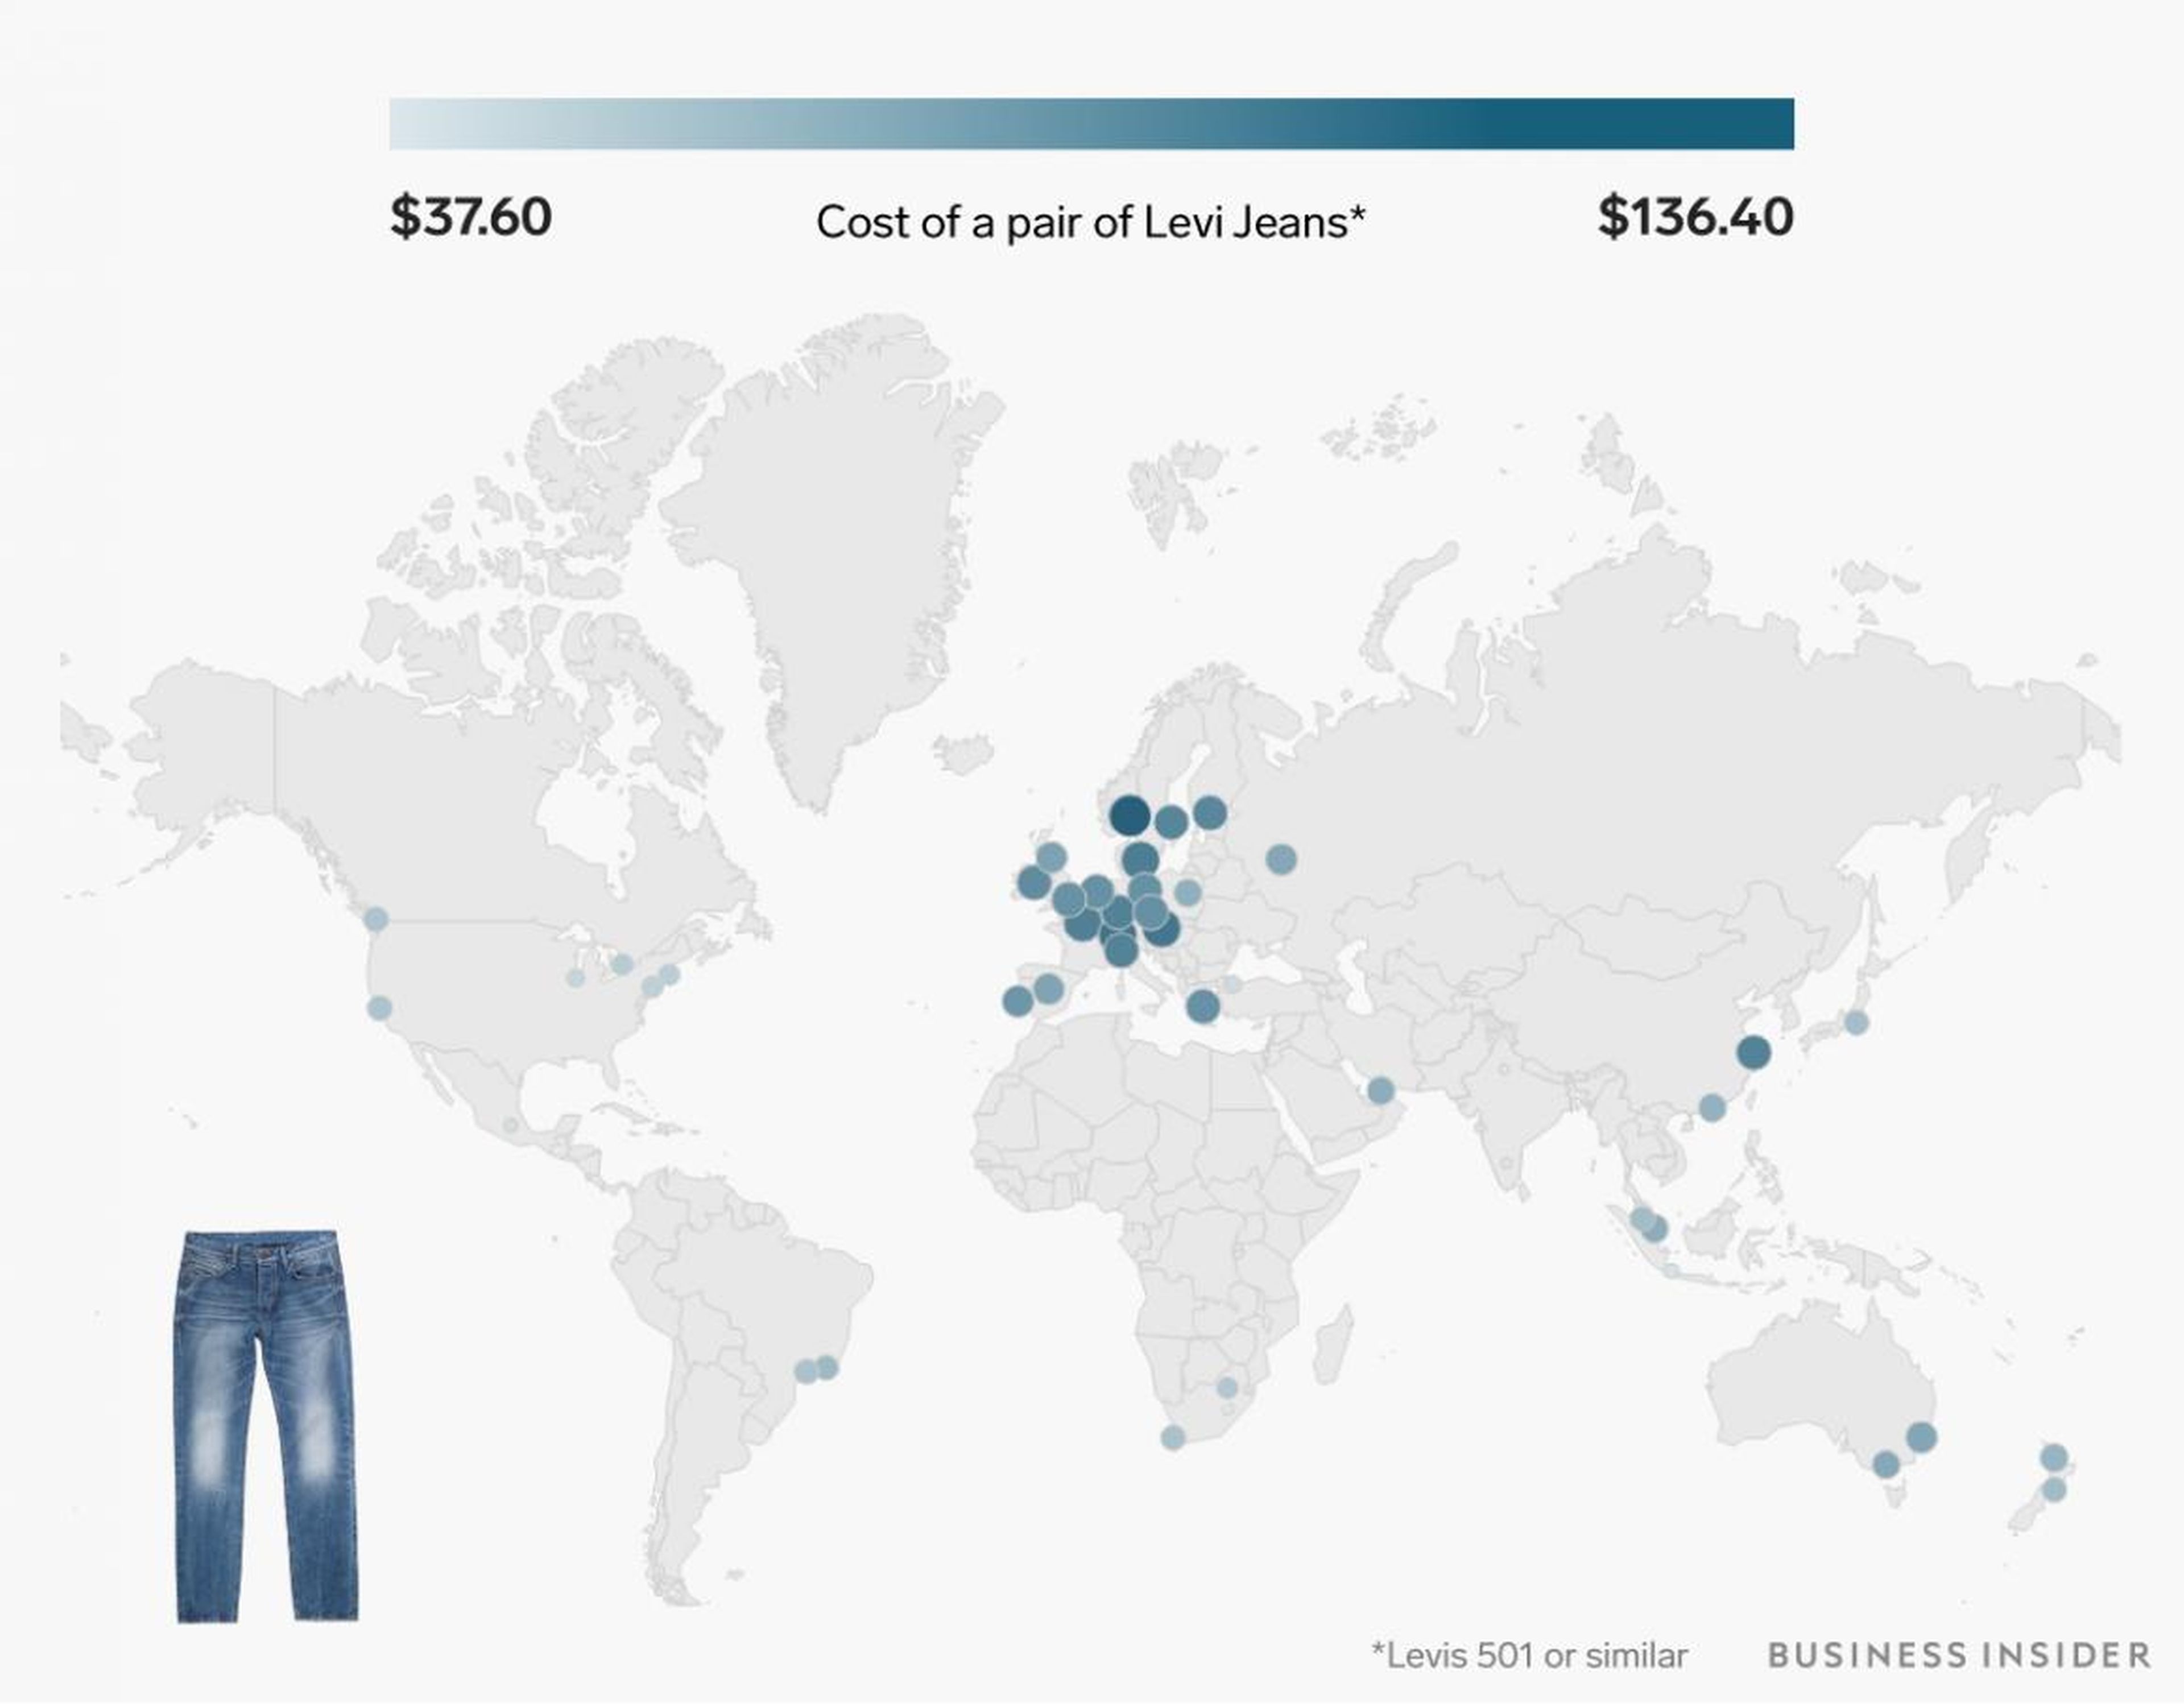 A pair of Levi's jeans costs between $37 and $136.